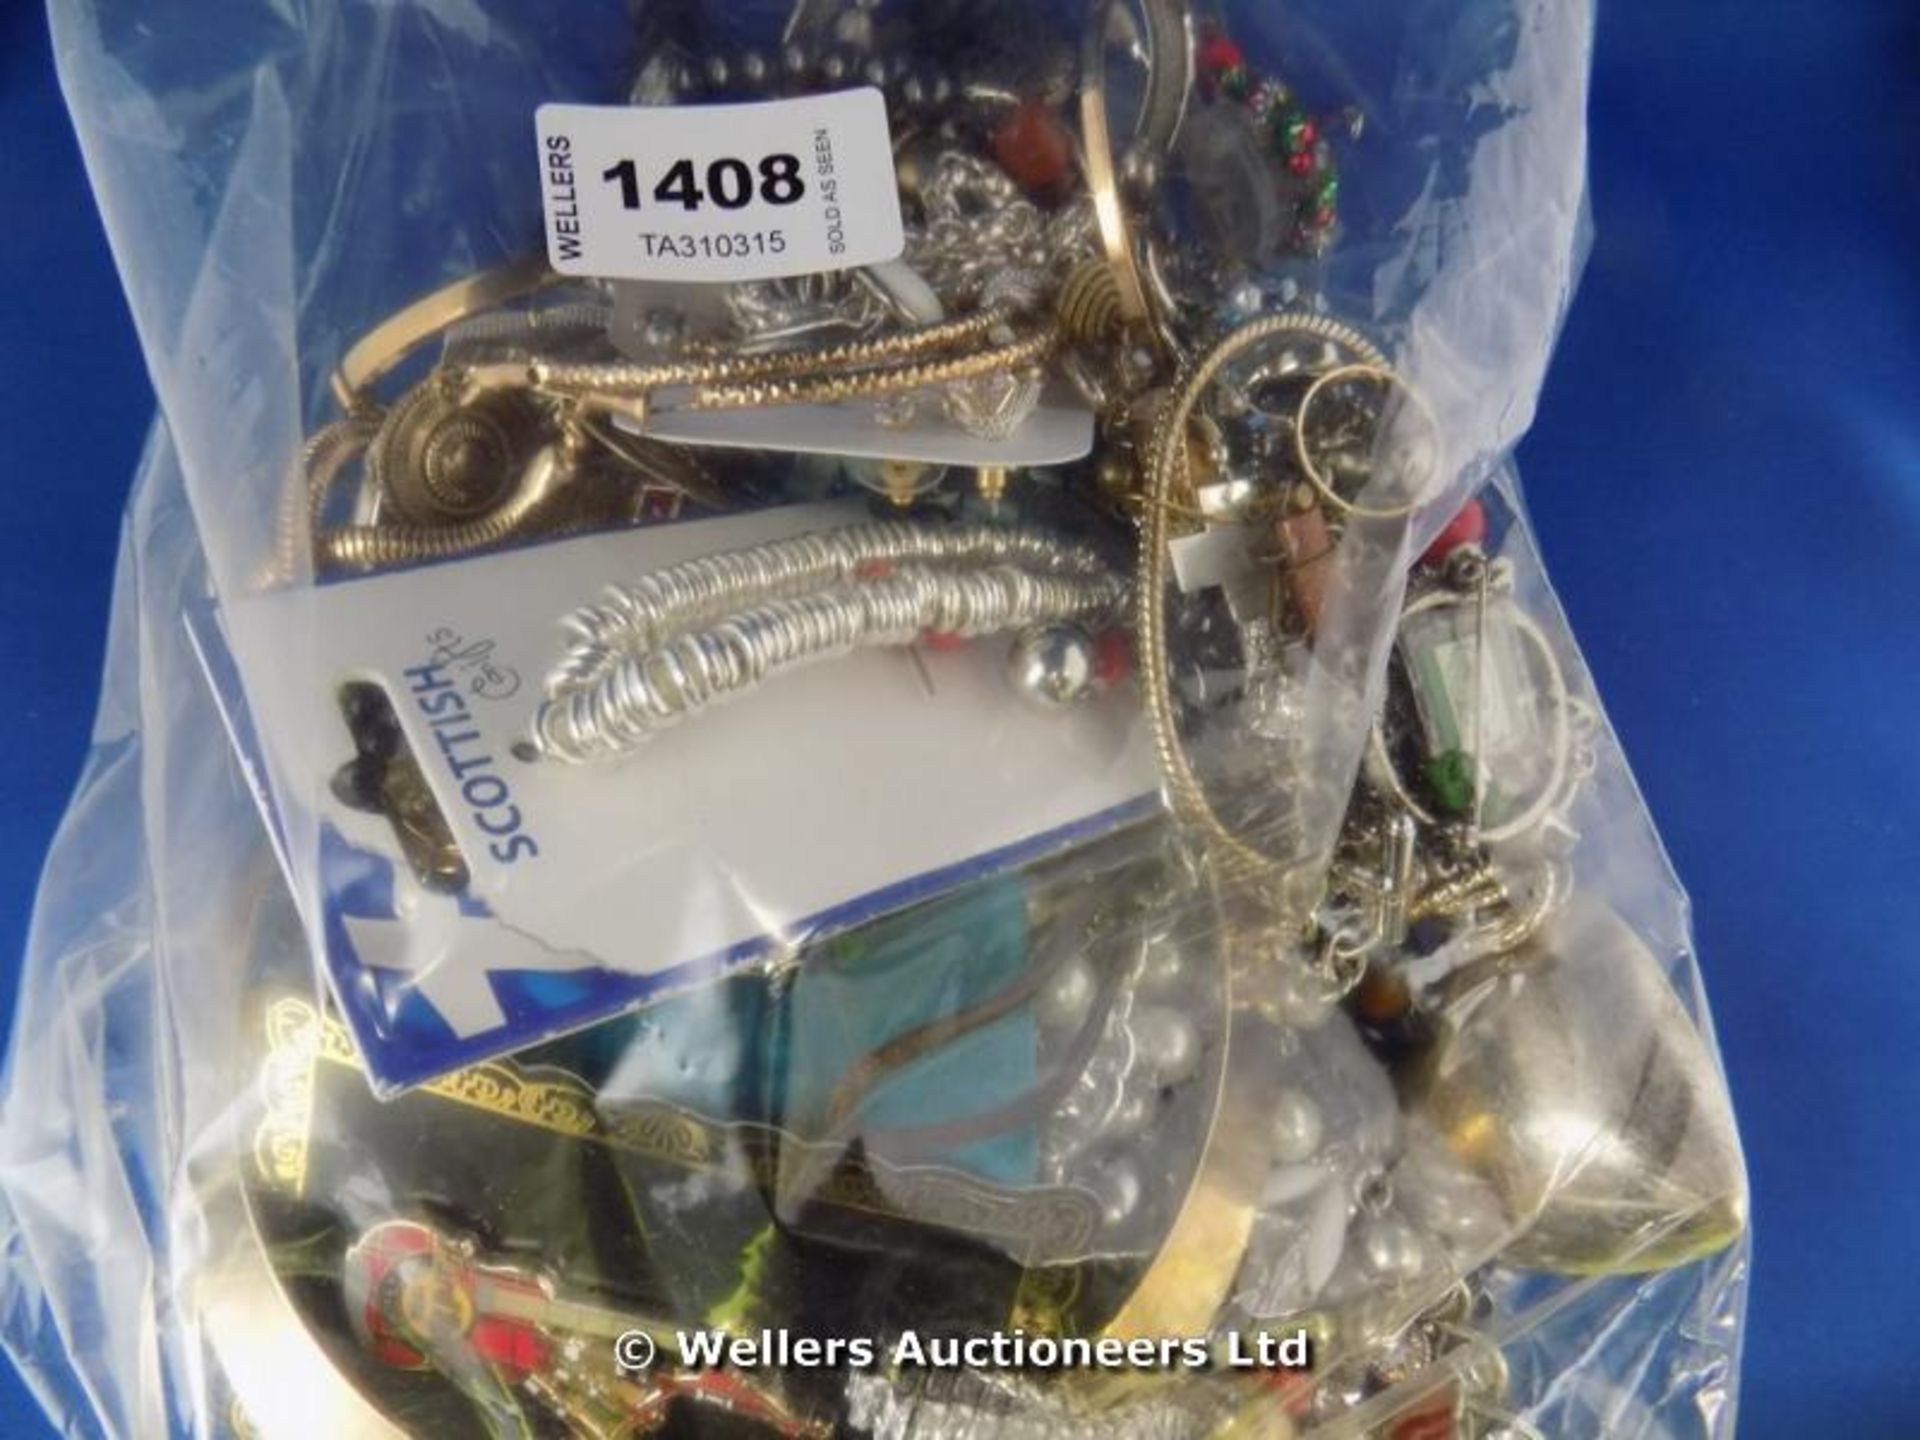 *BAG OF MIXED FASHION JEWELLERY / GRADE: UNCLAIMED PROPERTY / UNBOXED (DC2)[TA310315-1408}